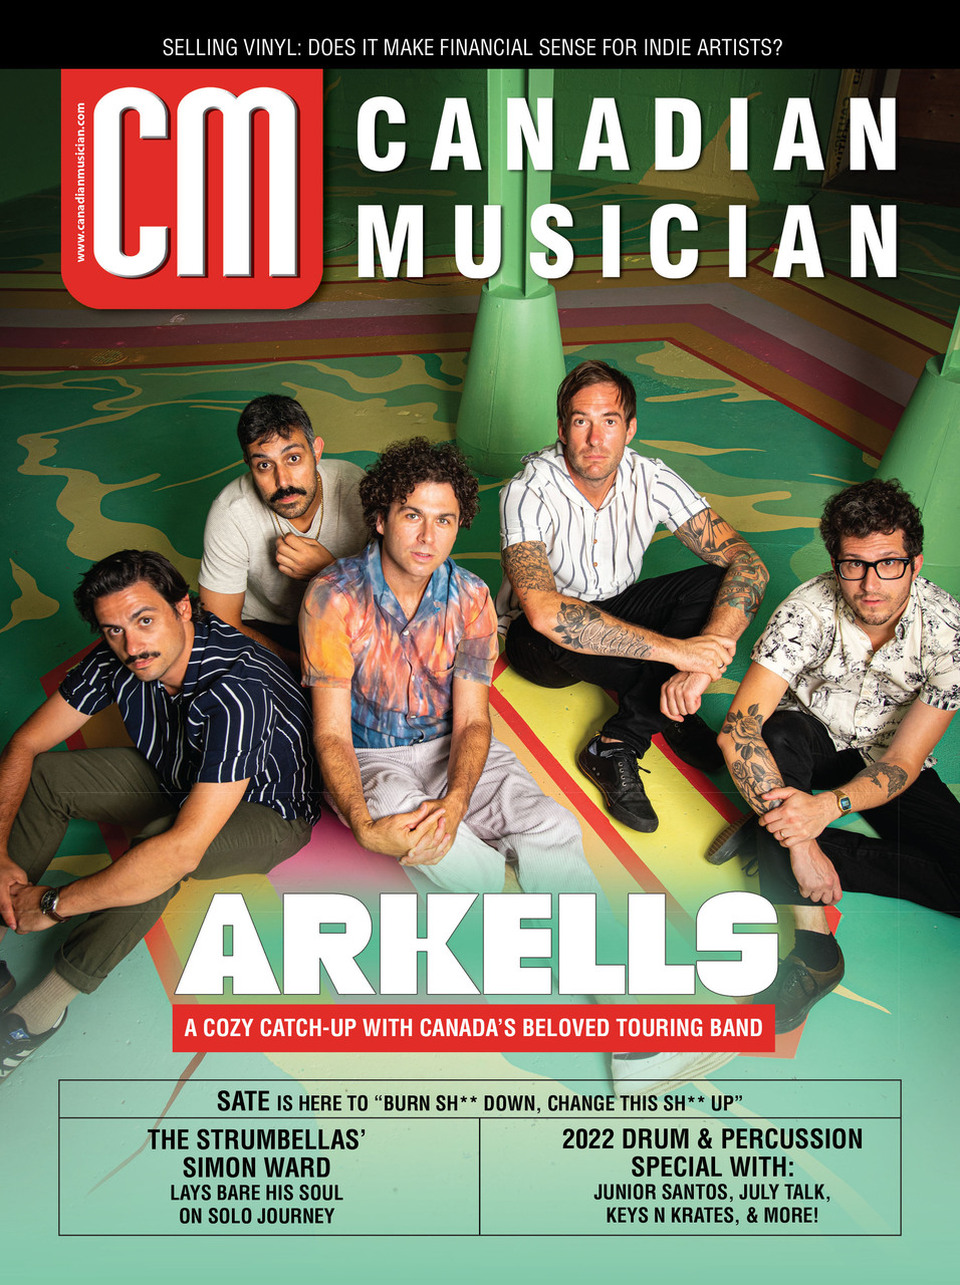 Subscribe to Canadian Musician Magazine